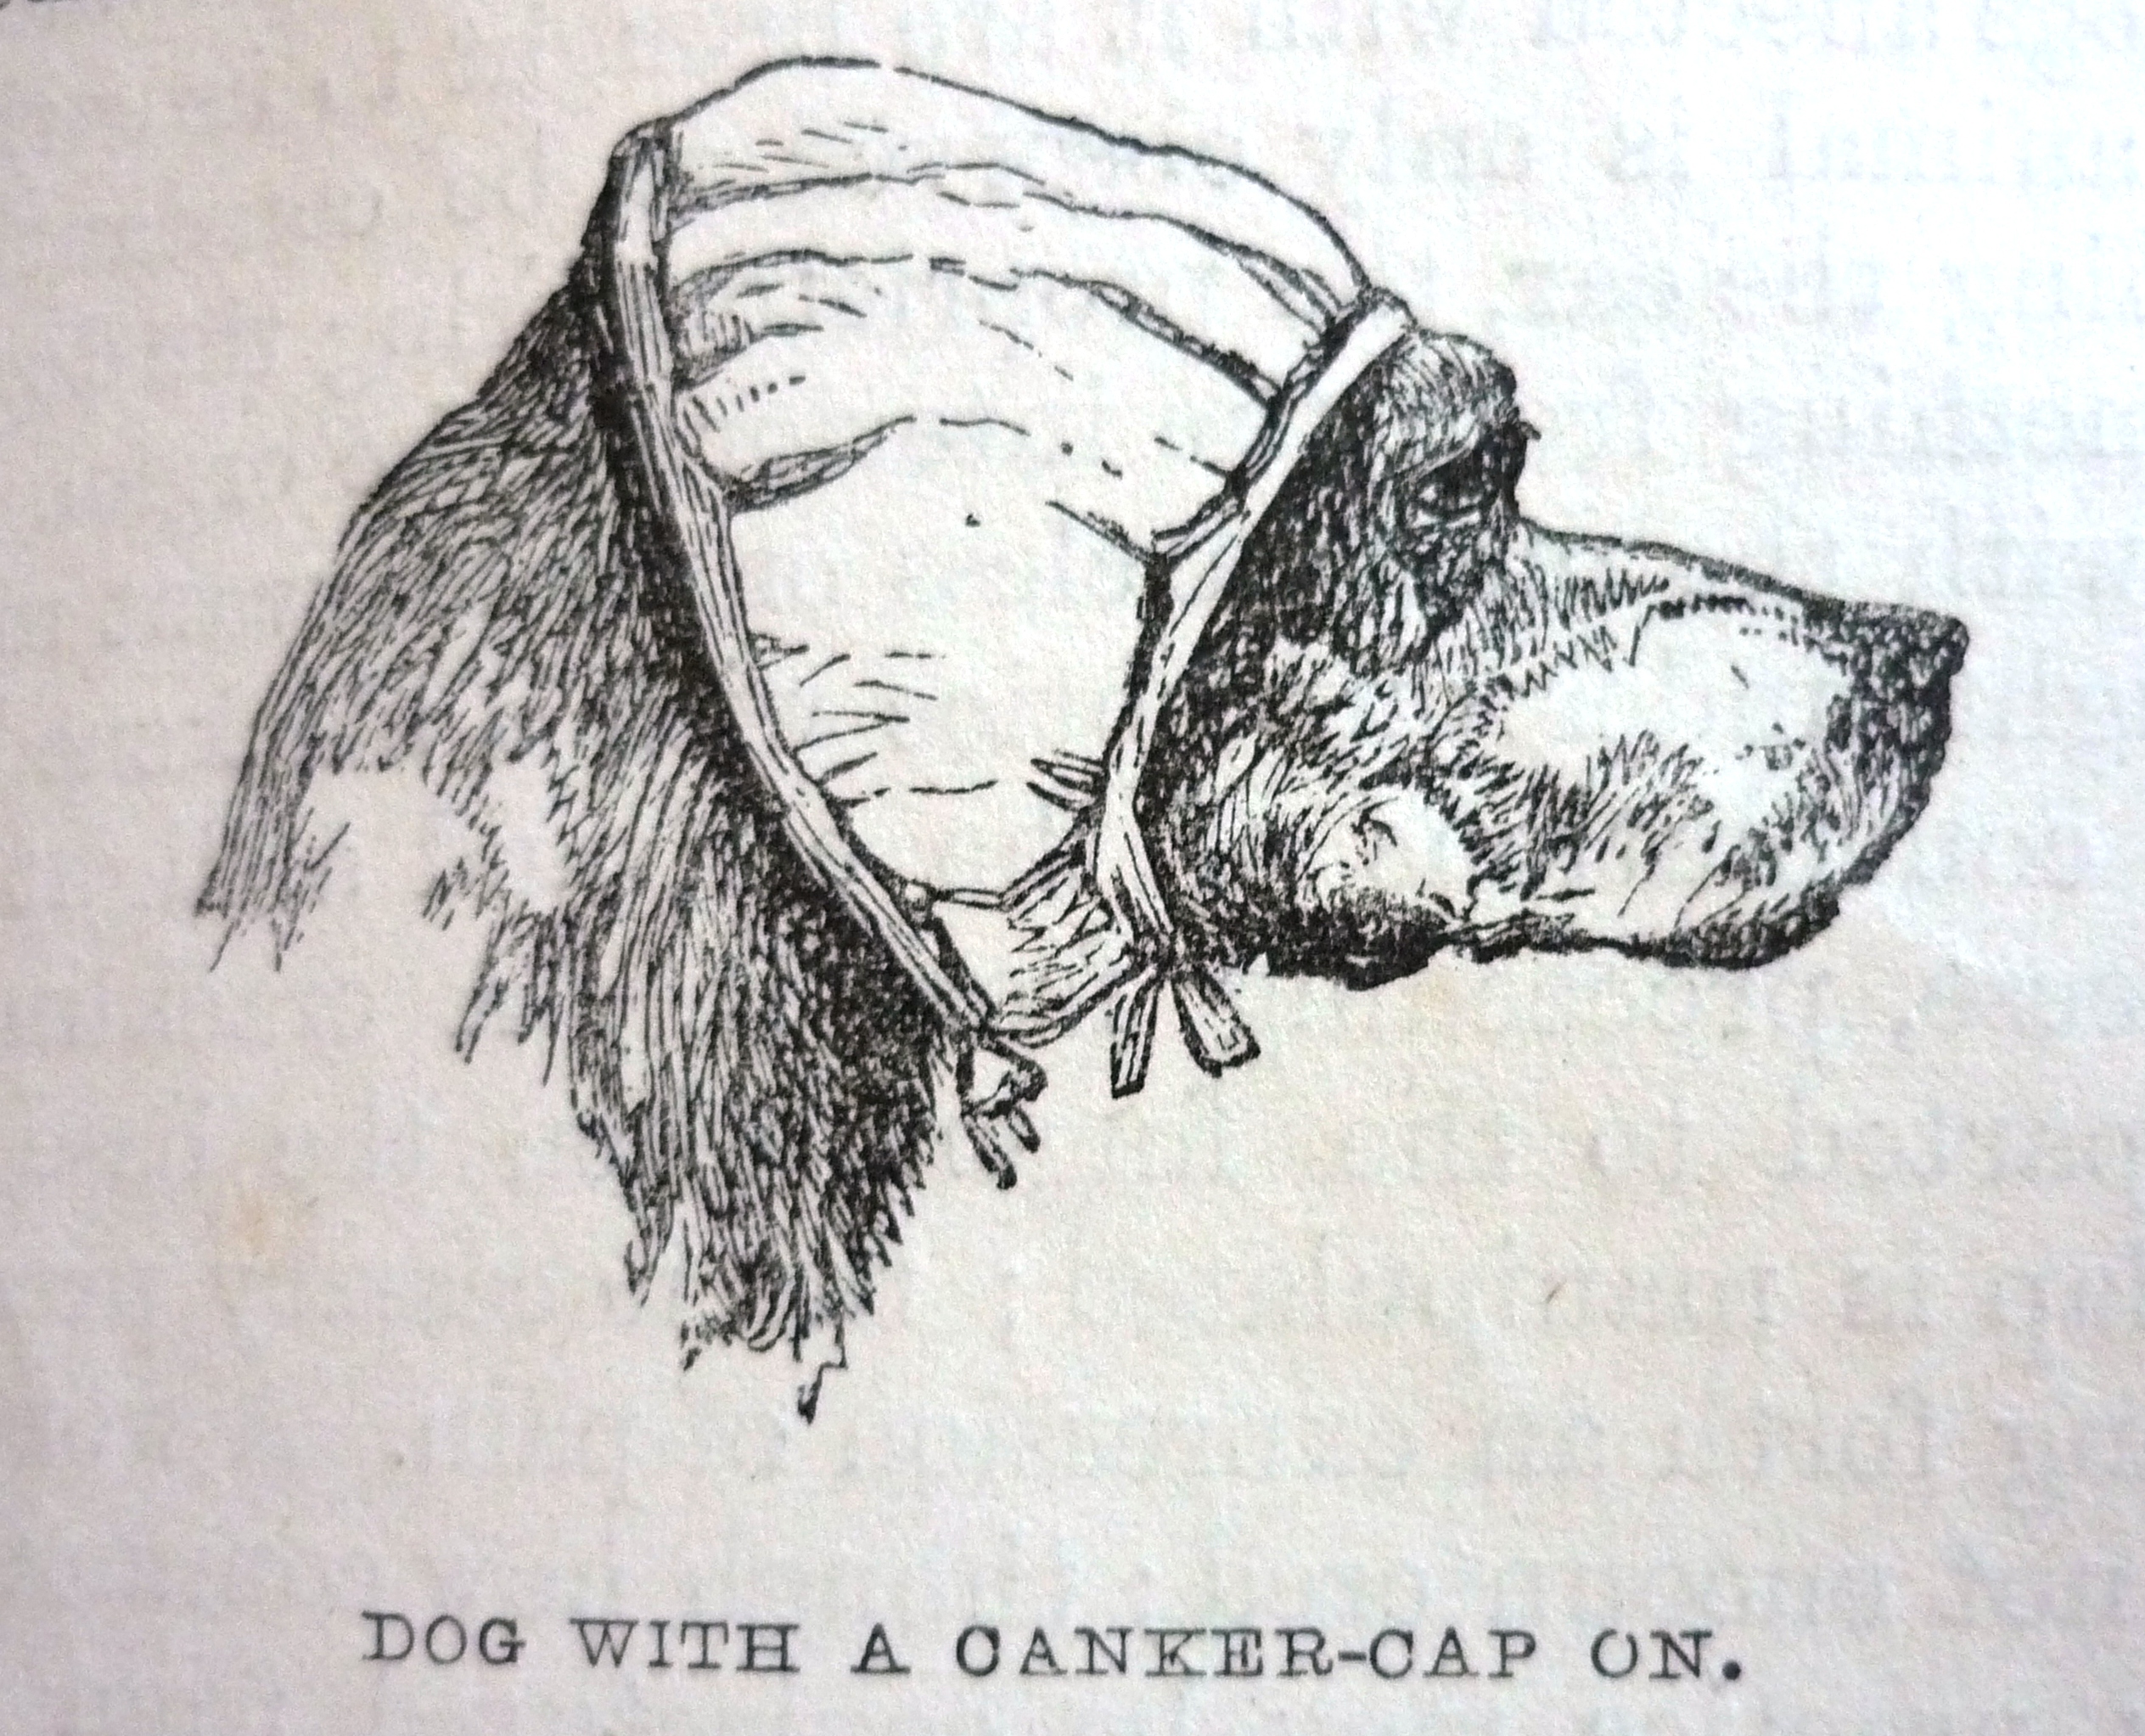 Edward Mayhew's Dogs: their management - Dog with canker cap on